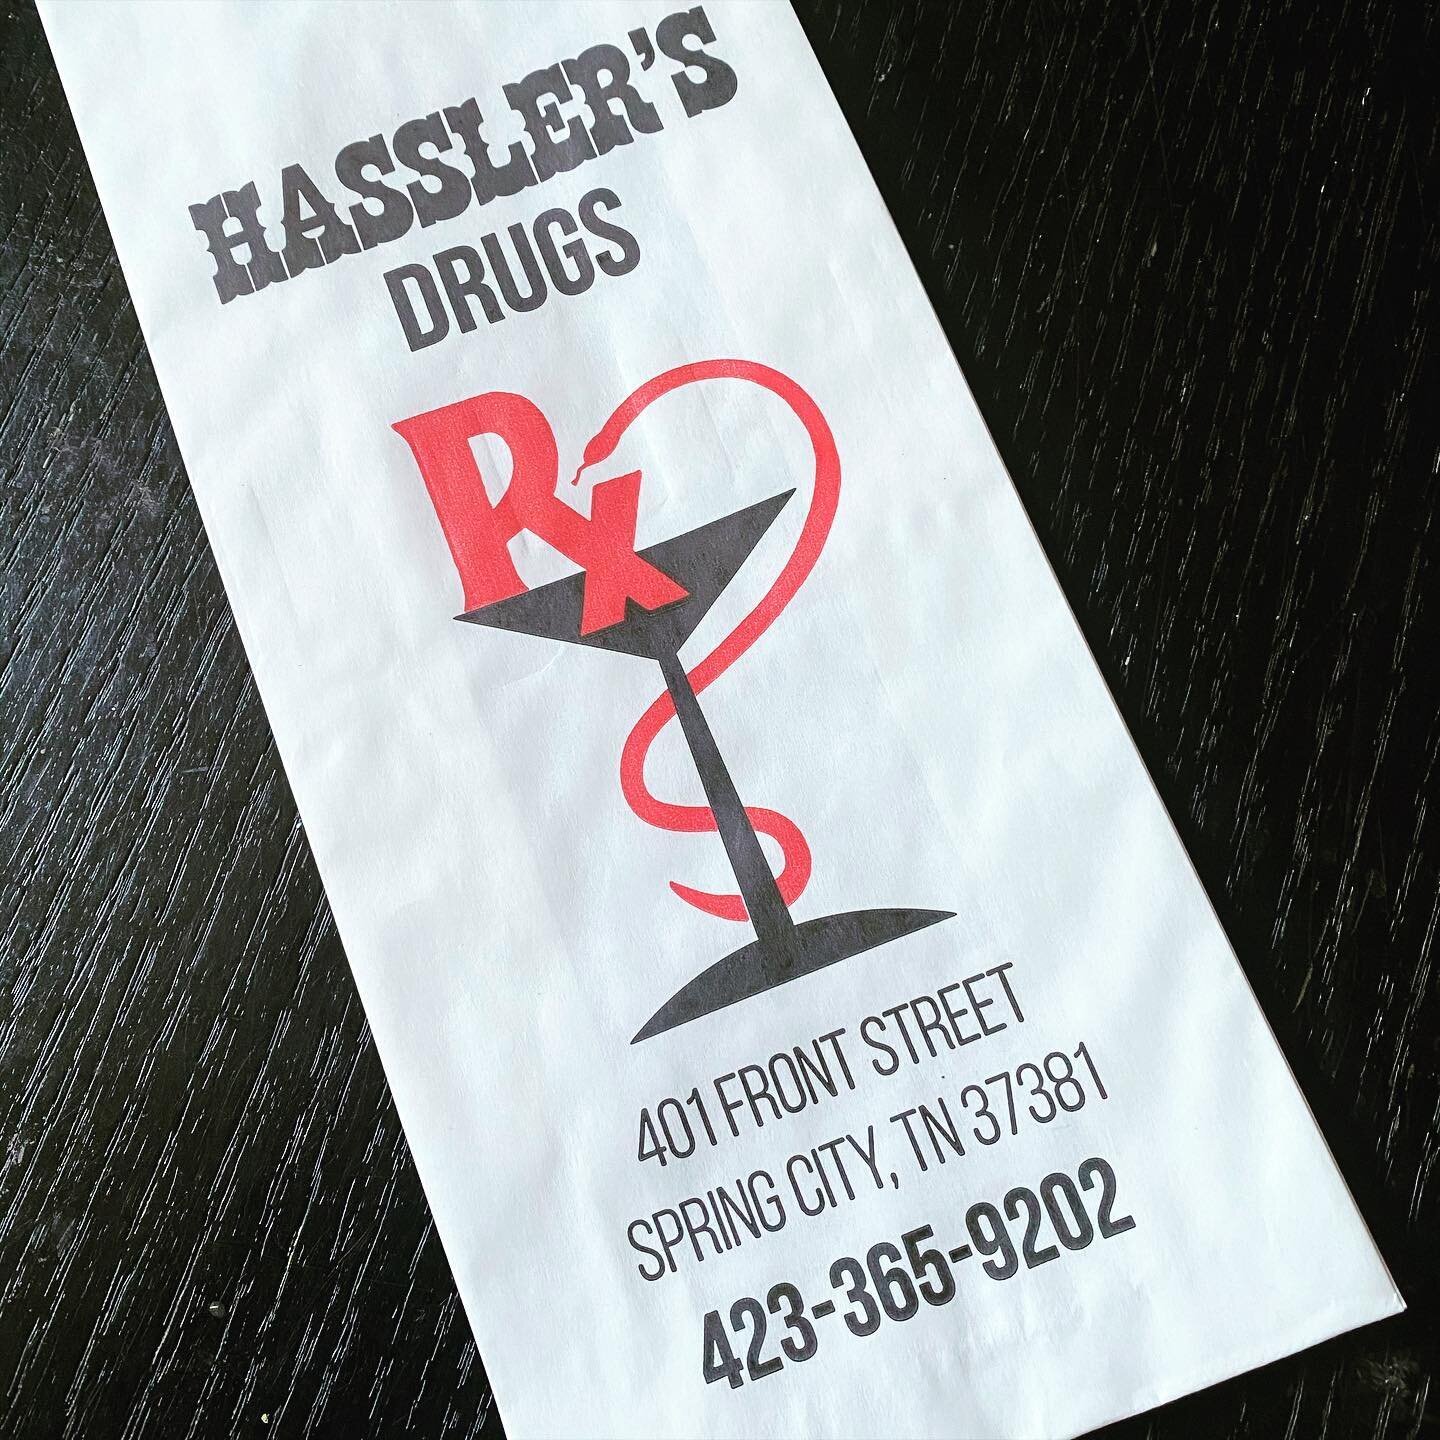 Shout out to the hometown pharmacies, our bread-and-butter business for over 60 years! Today&rsquo;s bag comes from Hassler&rsquo;s Drug in Spring city Tennessee. Did you know every bag we make is designed to be easy to open?&hellip; True story. To g